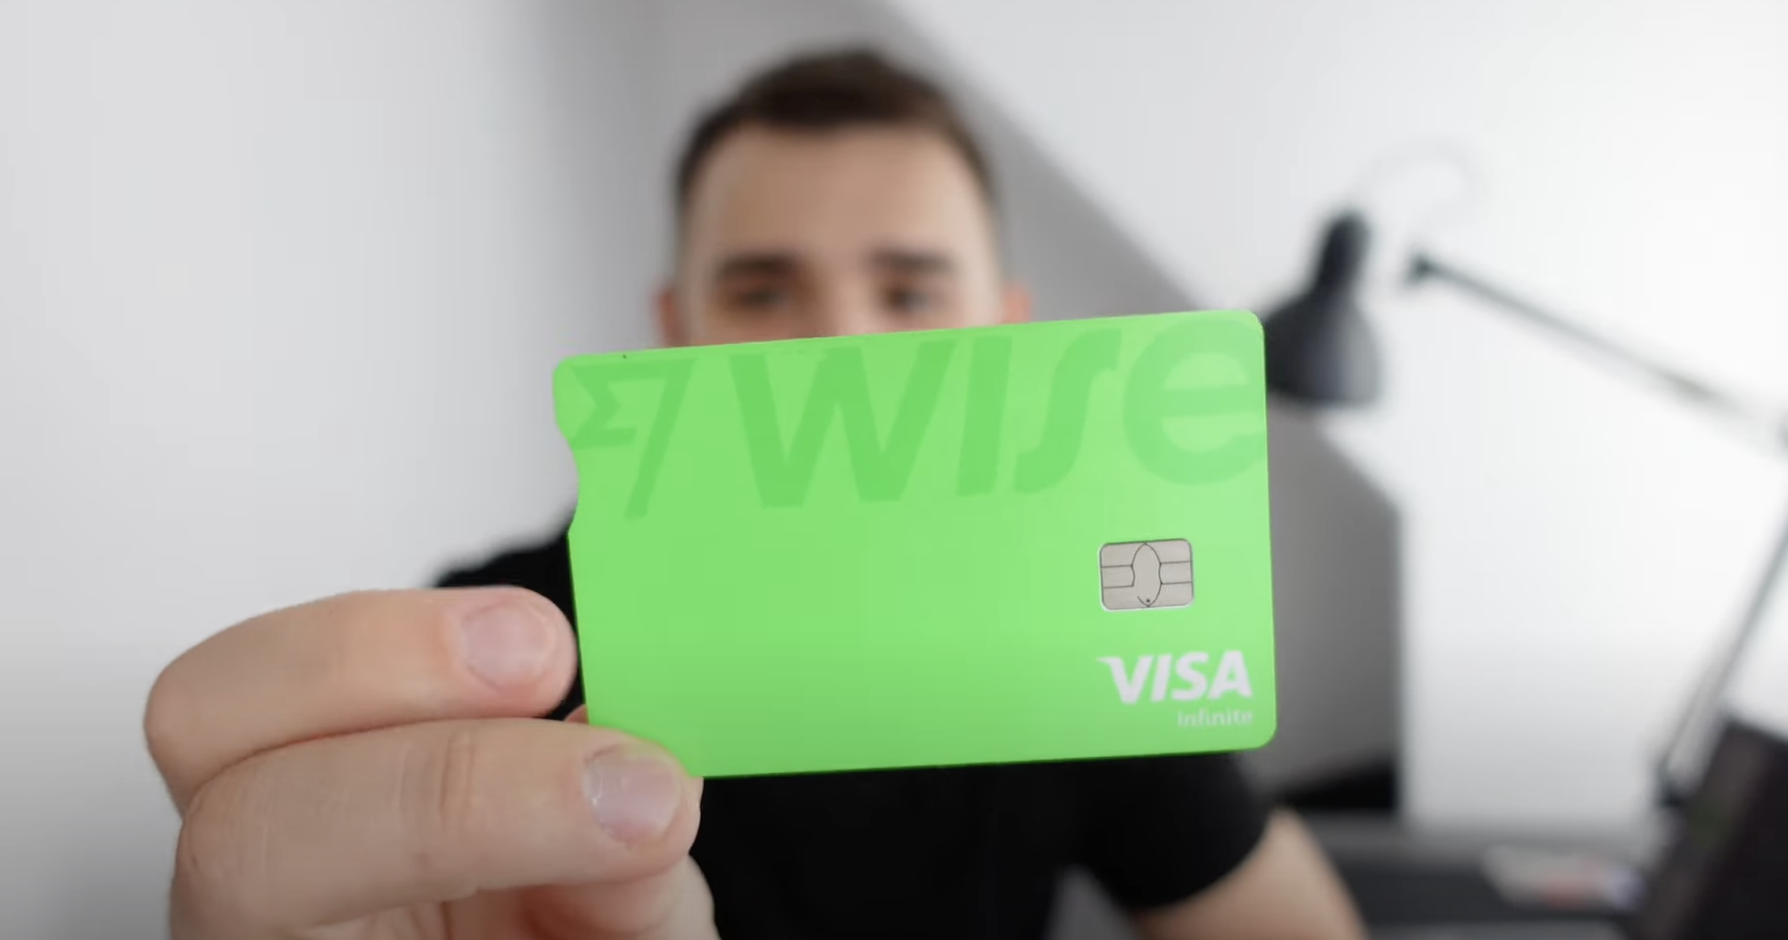 How to Send a Bank Wire Transfer with Your Credit Card Using Wise